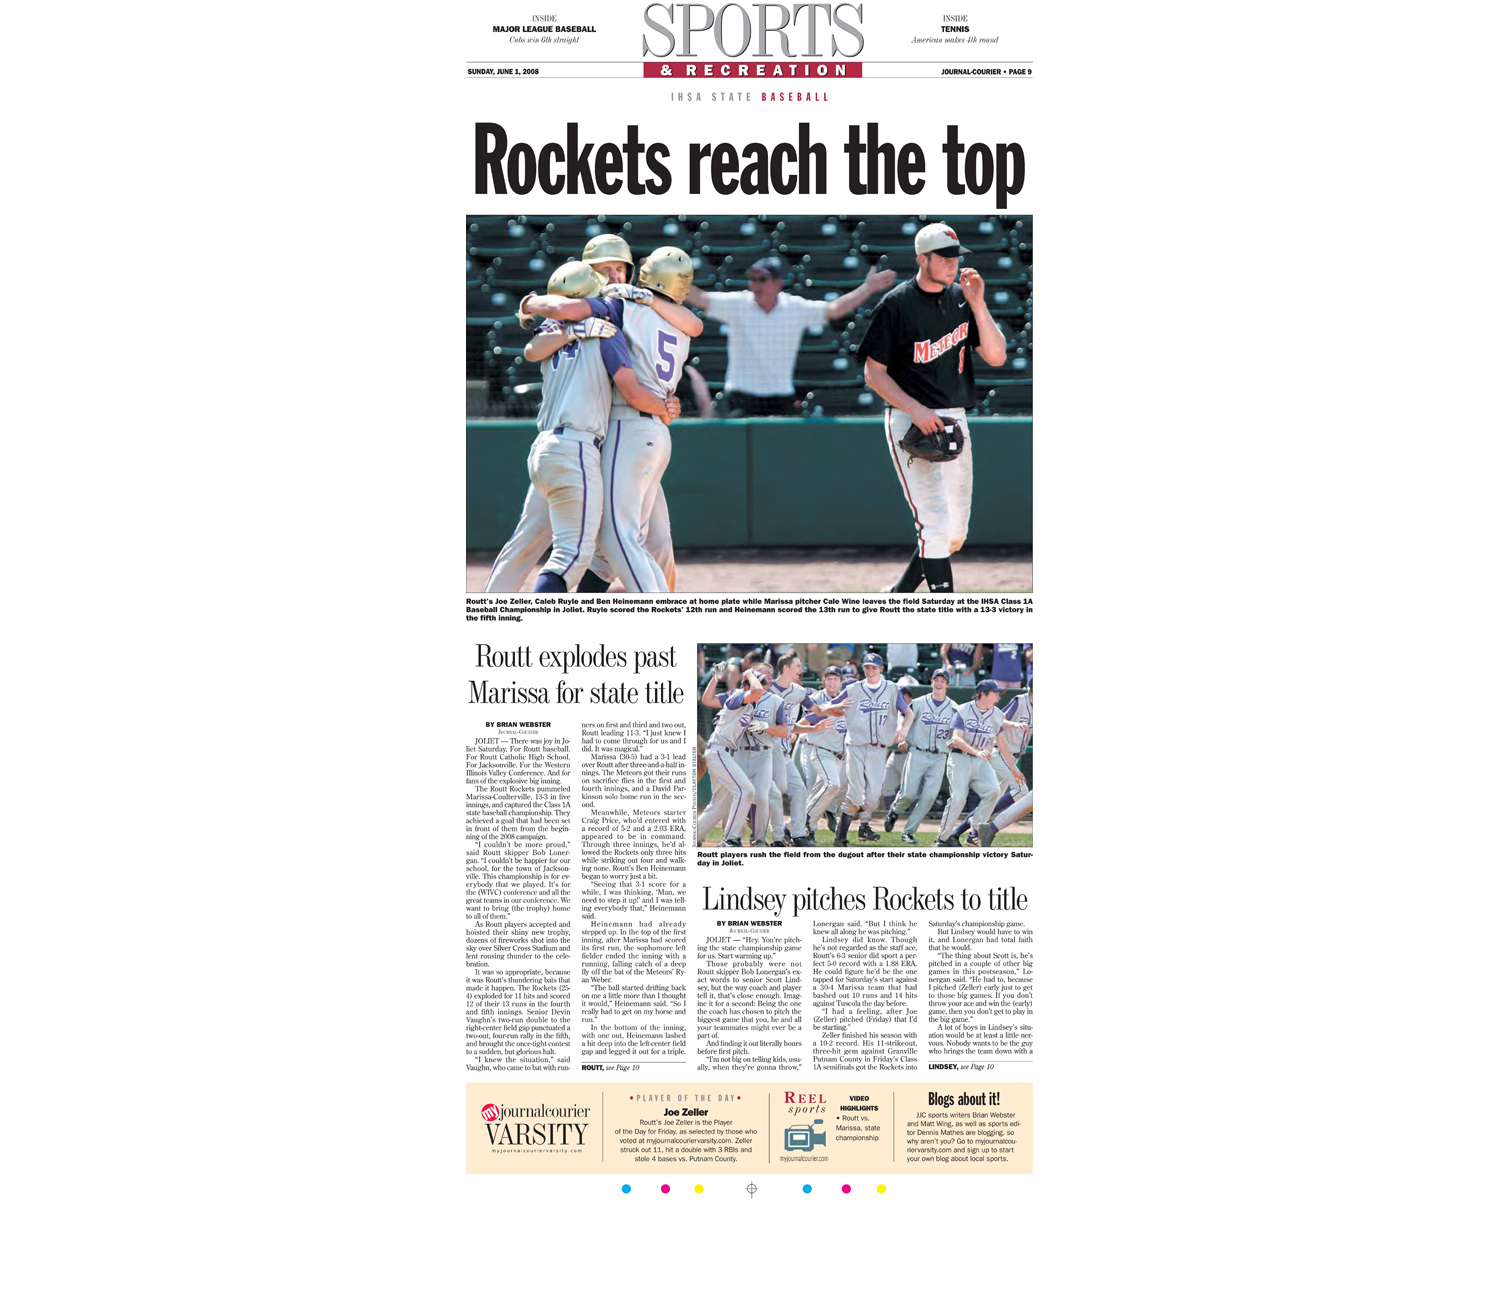  Daily coverage of the Routt Catholic High School's victory in the IHSA State Baseball Tournament. 